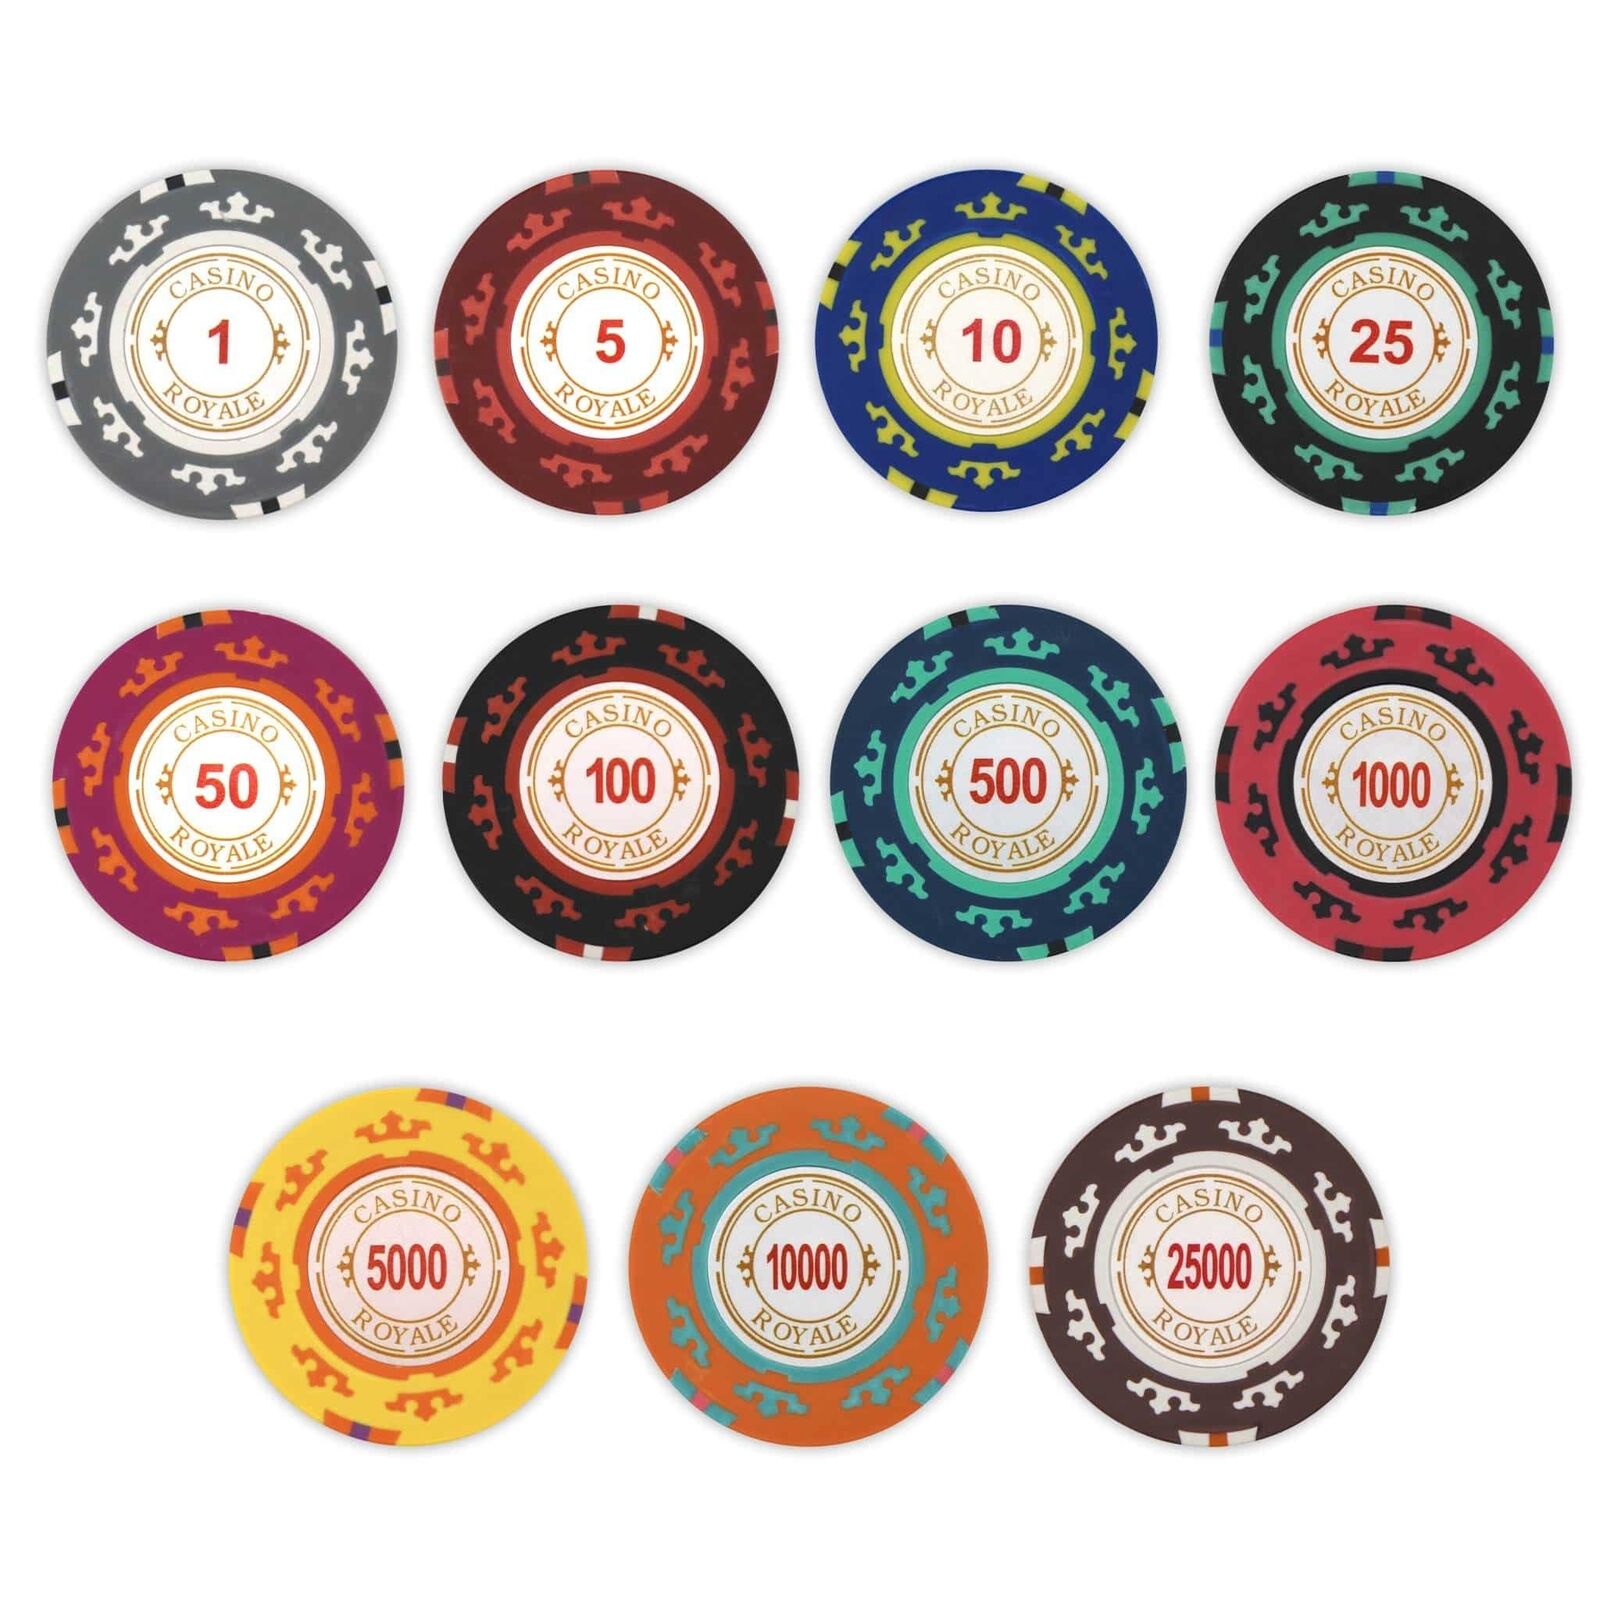 400 Casino Royale Poker Chips - 14 gram - Pick Your Denominations